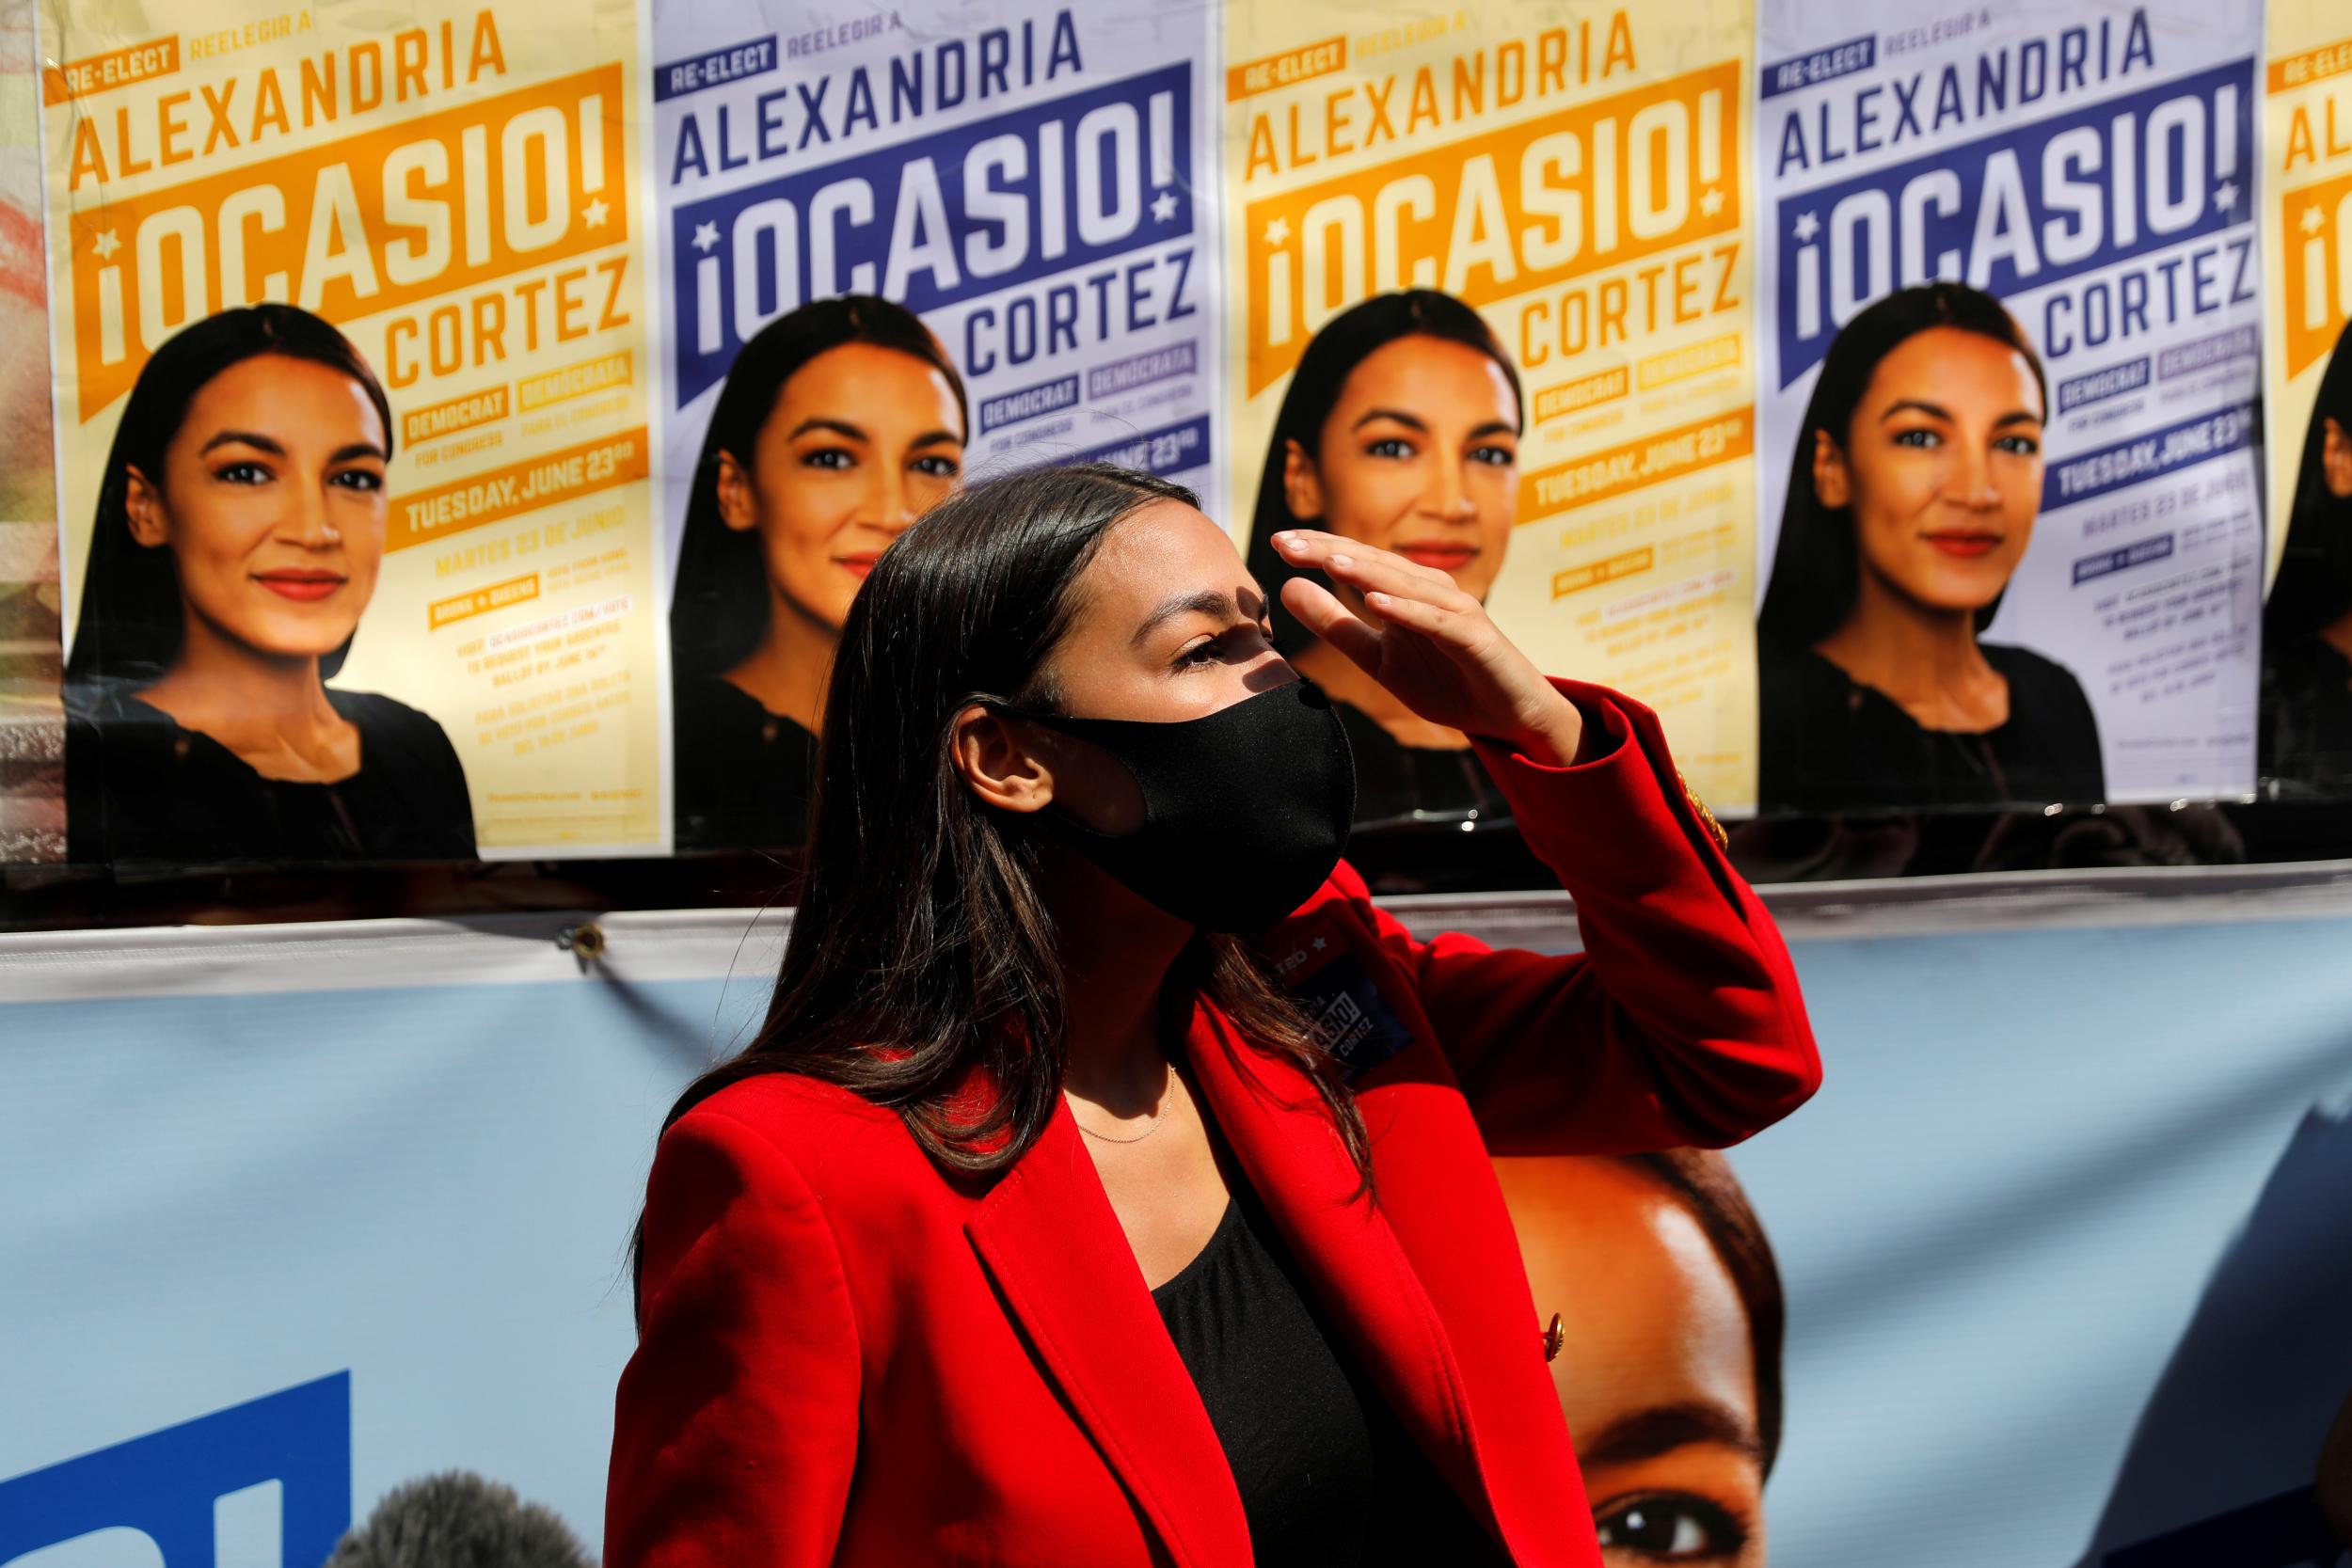 Ocasio-Cortez makes a campaign stop in Queens on Tuesday